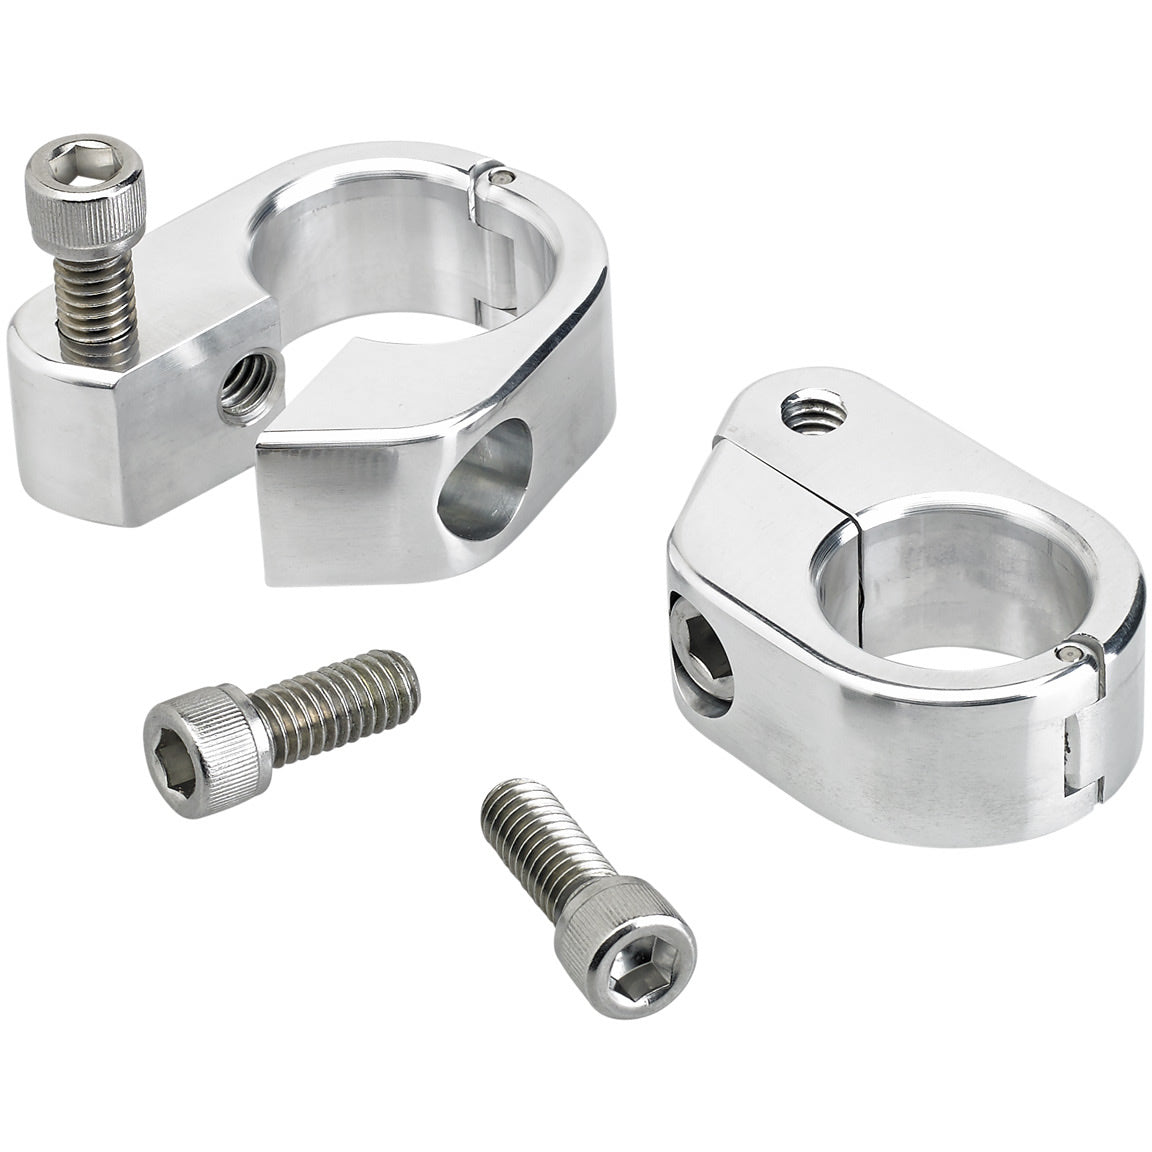 CLOSEOUT Speed Clamps - Polished